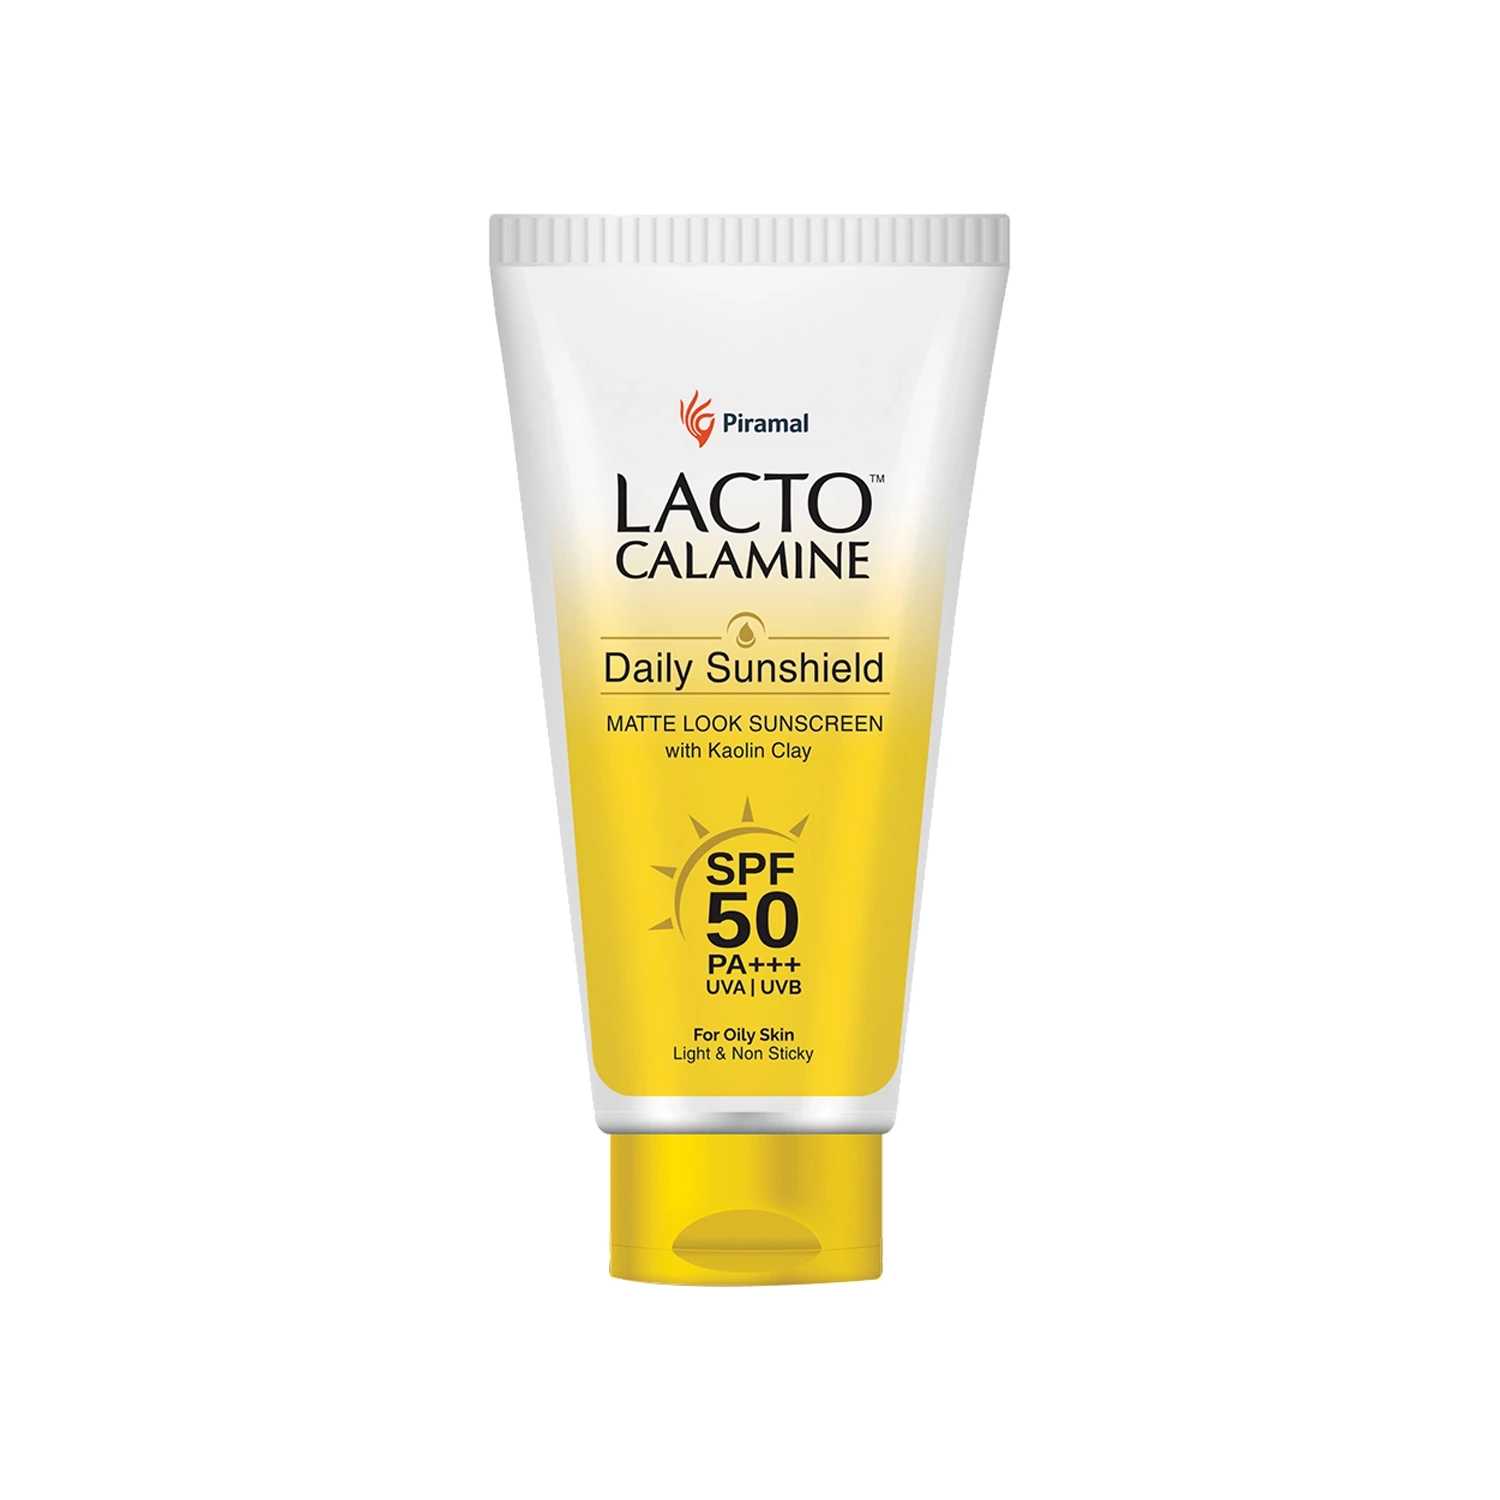 Lacto Calamin is one of the best cream for daily sunsheild